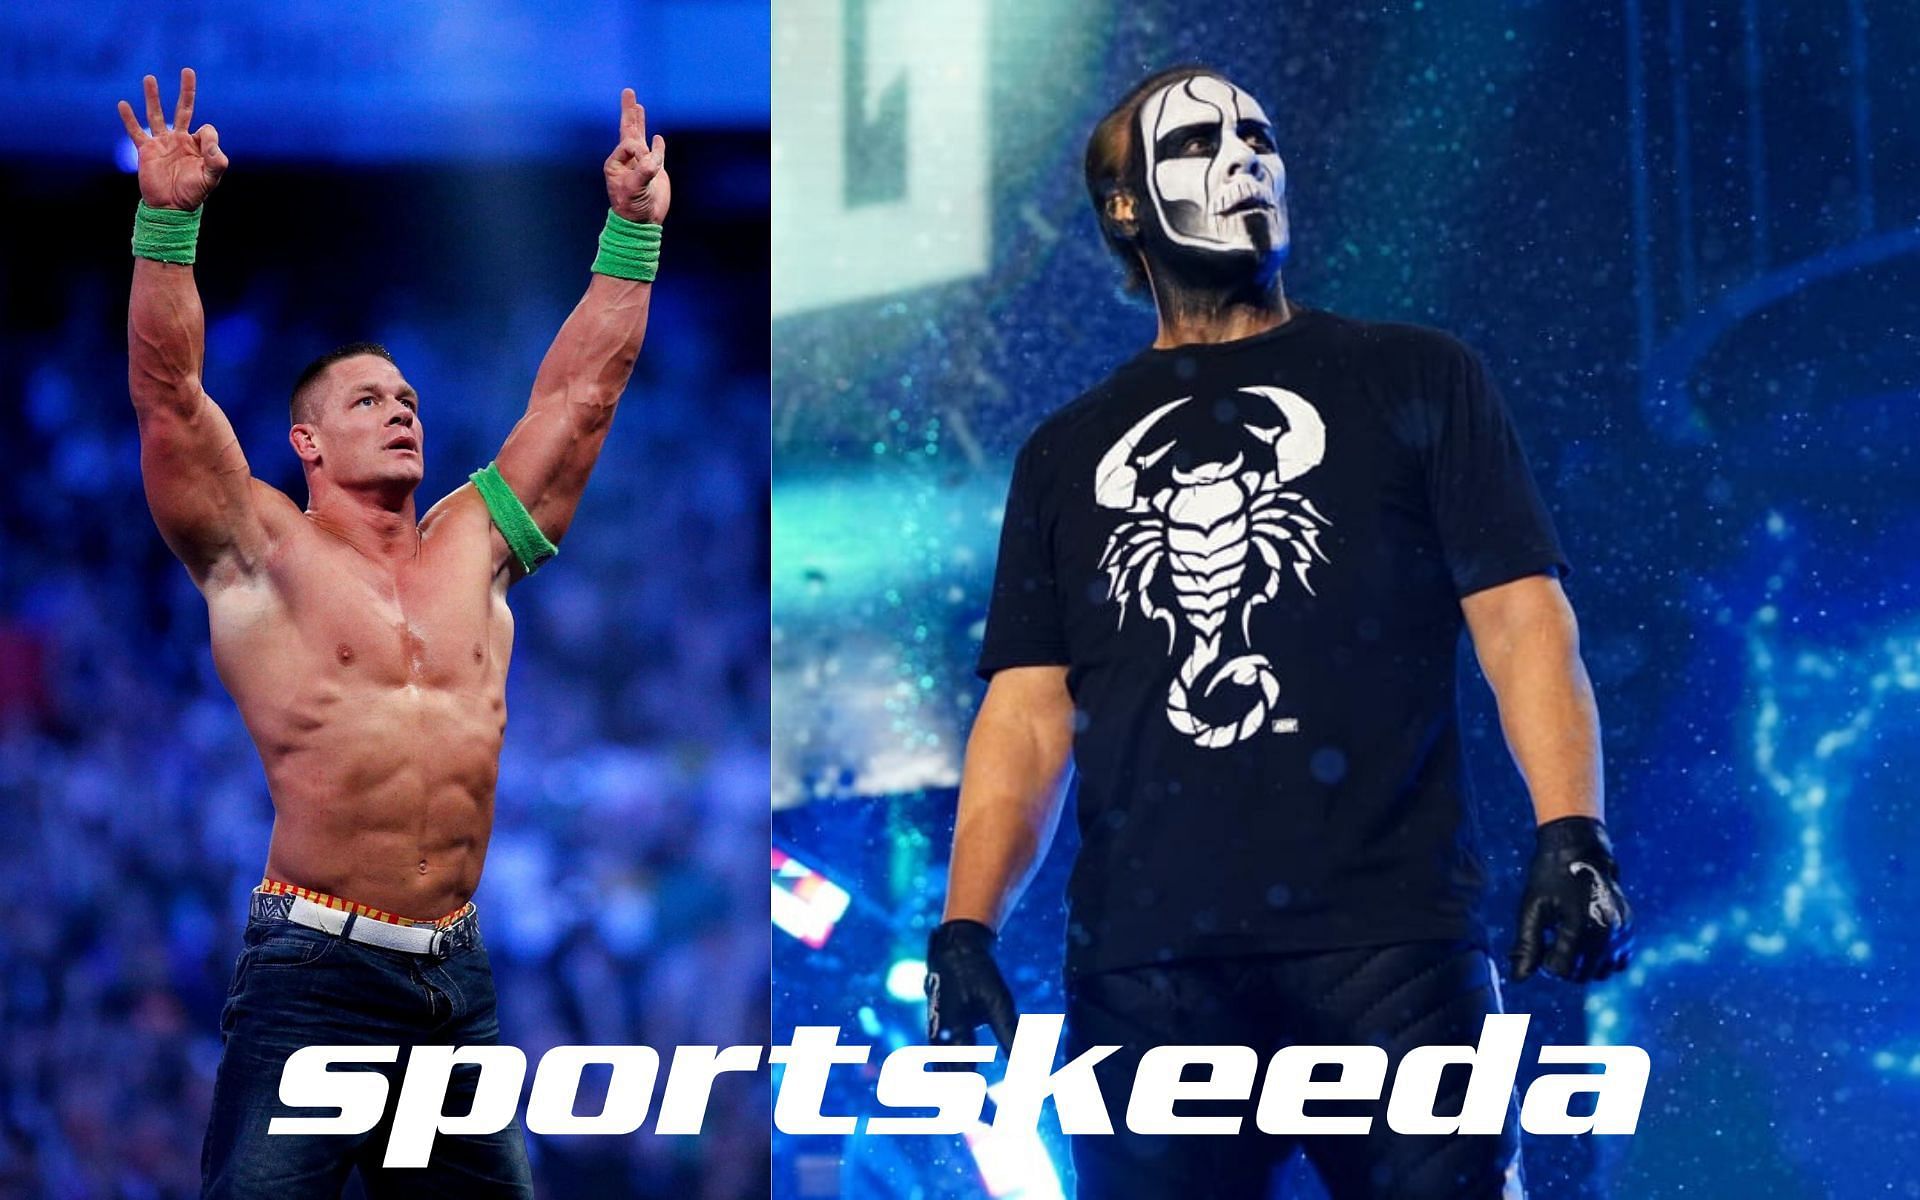 Sting and John Cena have nothing left to prove in professional wrestling.